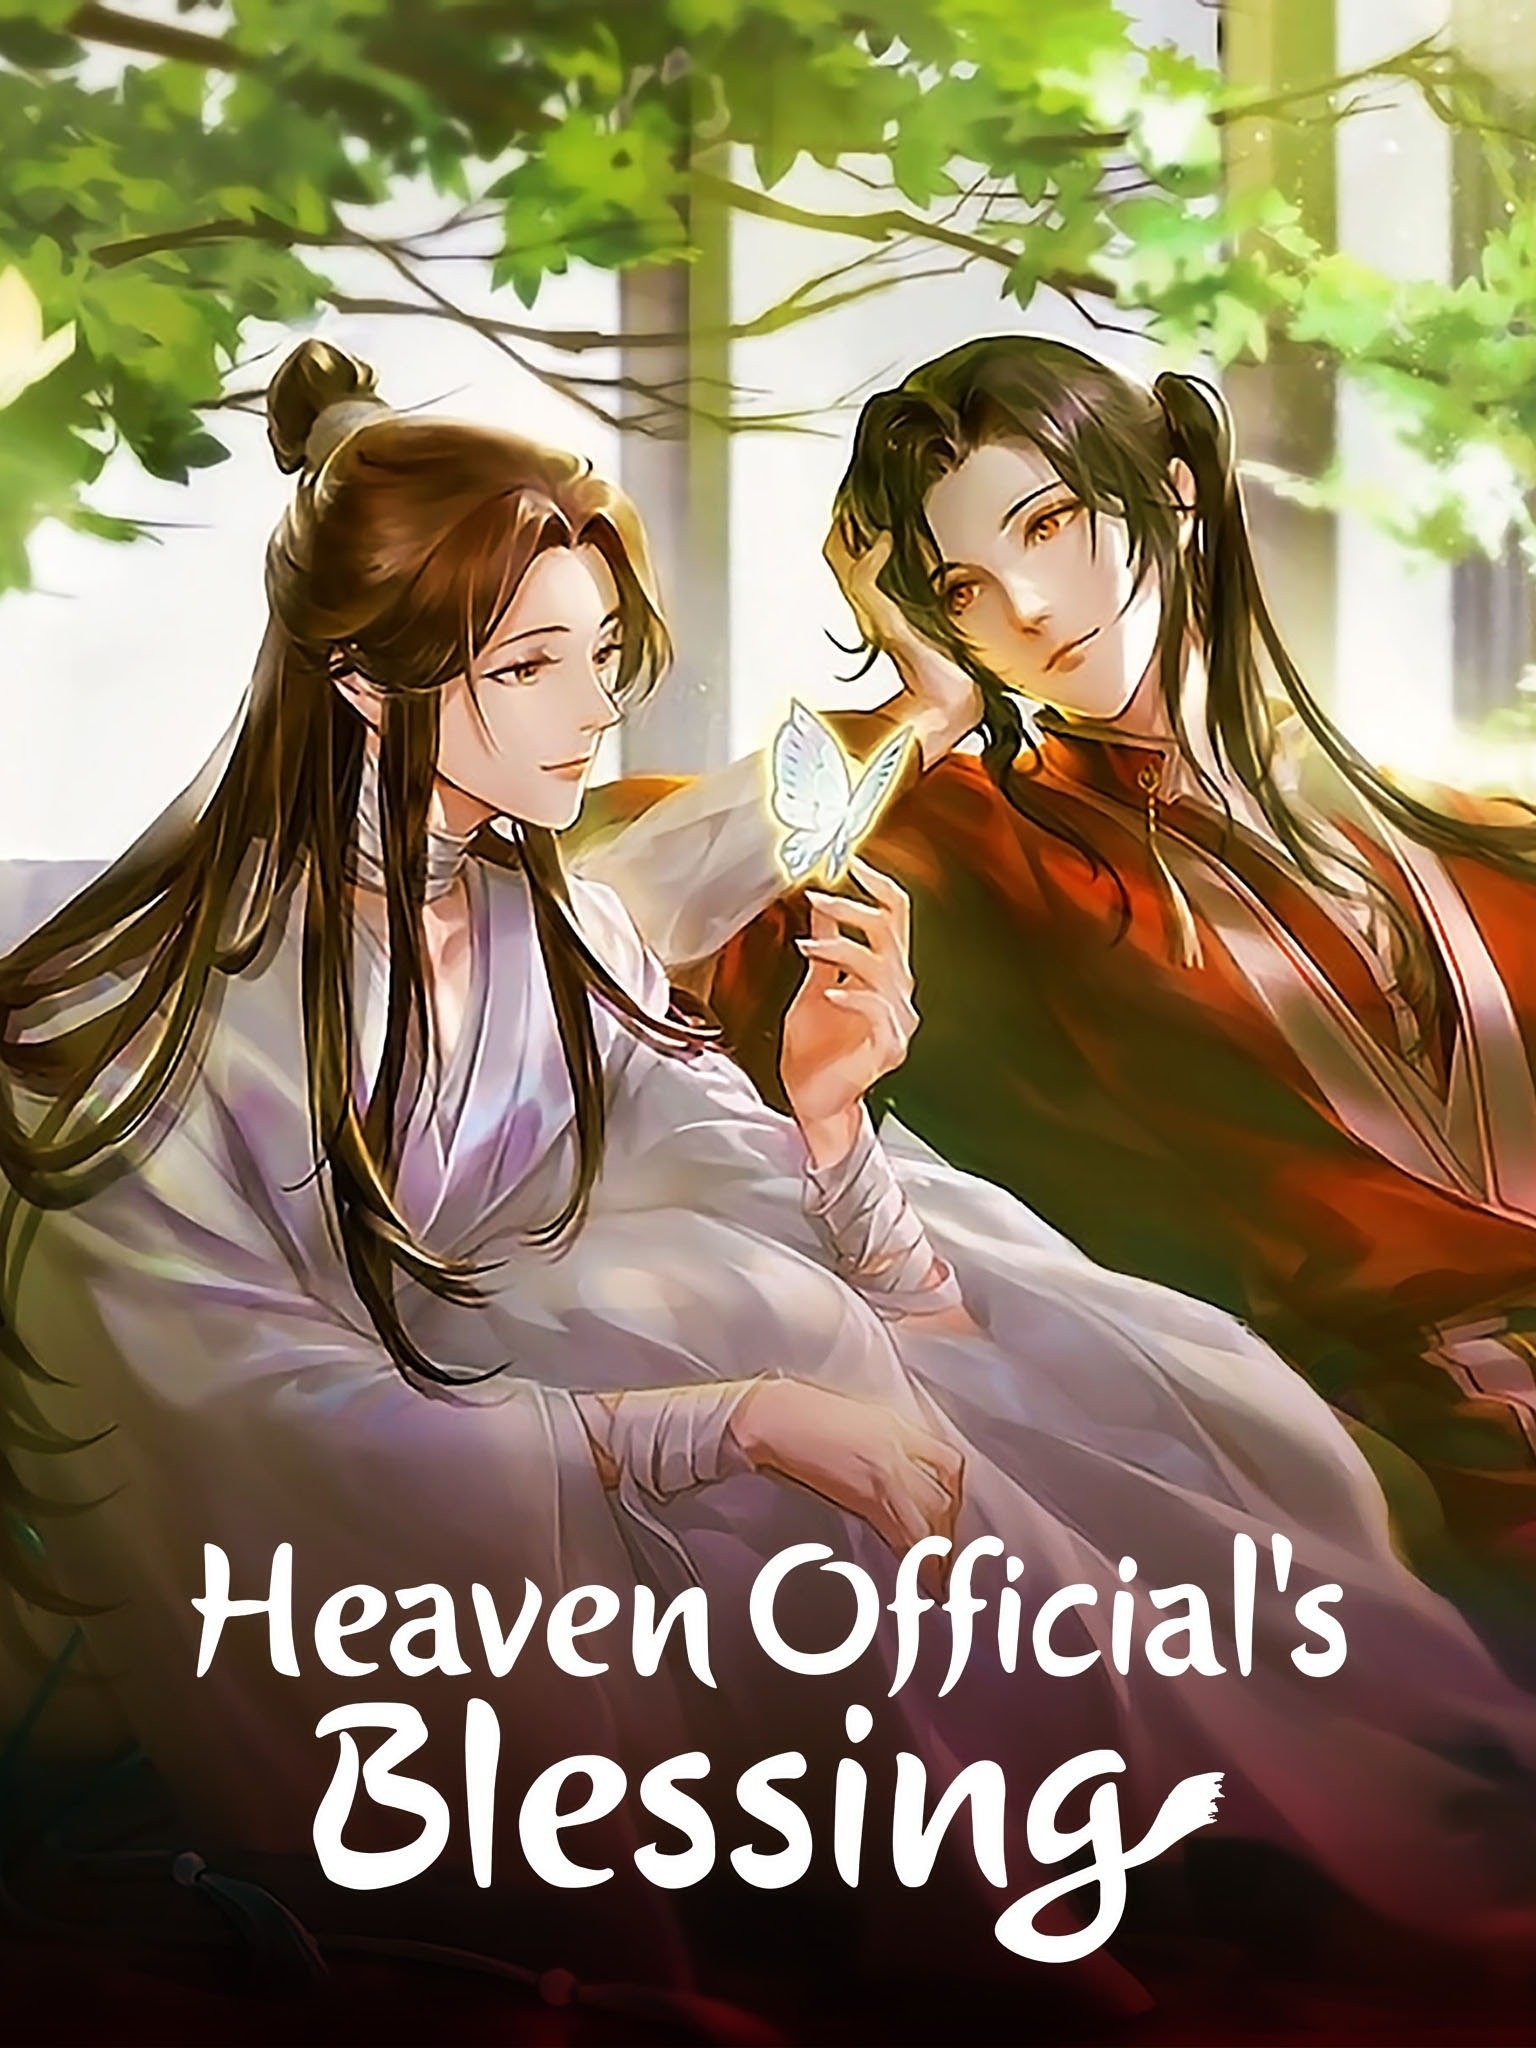 Heaven Official's Blessing Season 2 - episodes streaming online